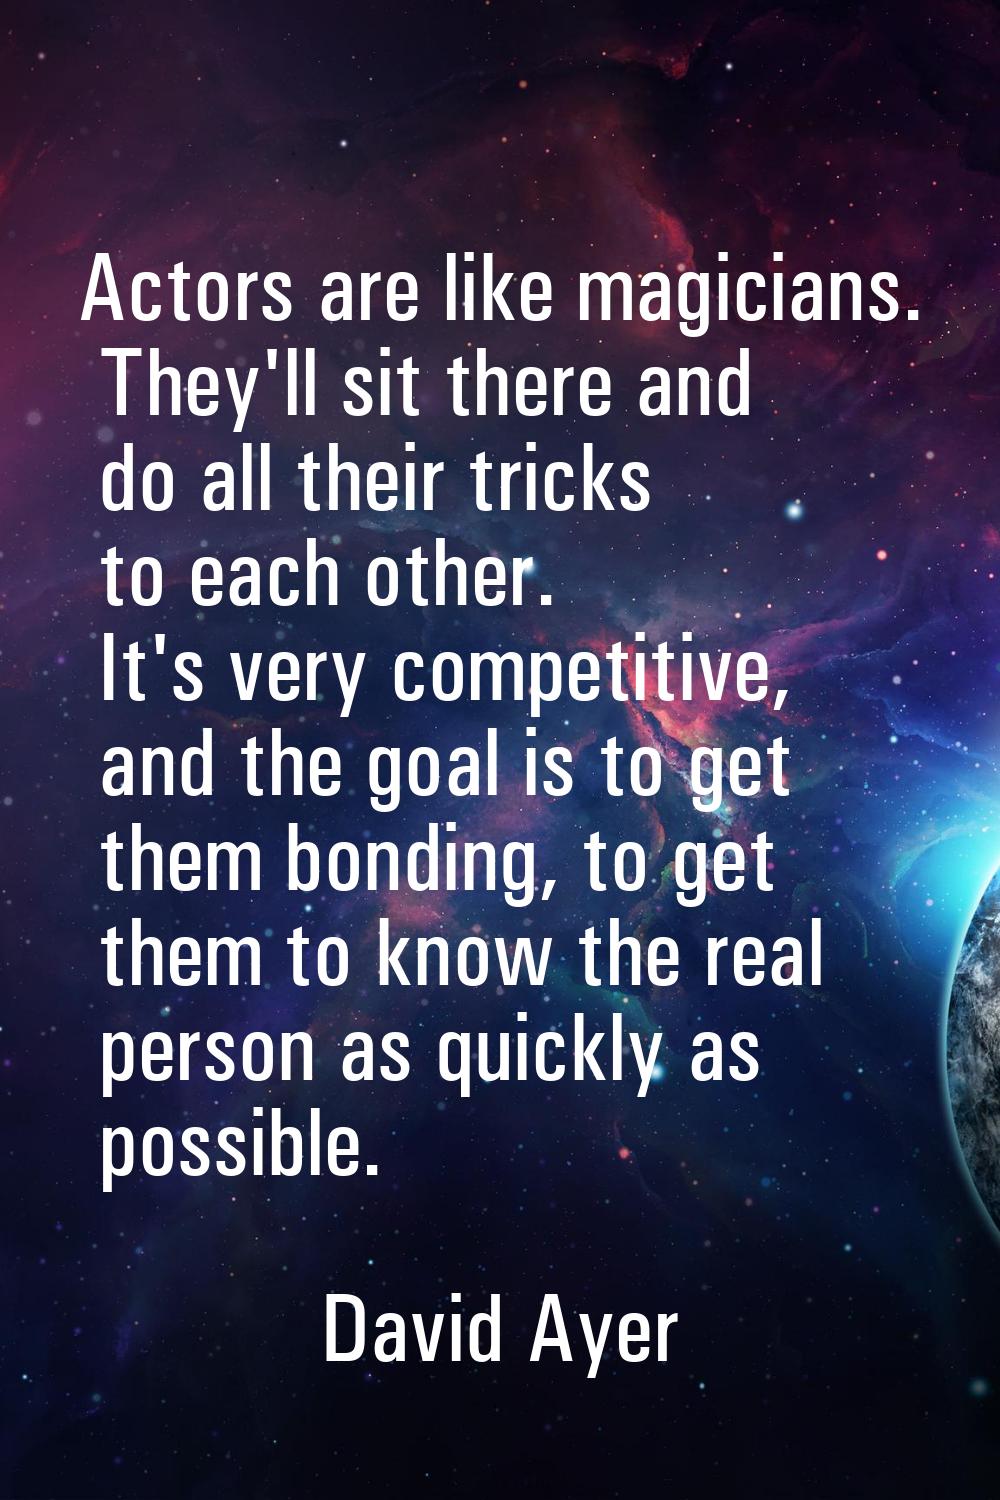 Actors are like magicians. They'll sit there and do all their tricks to each other. It's very compe